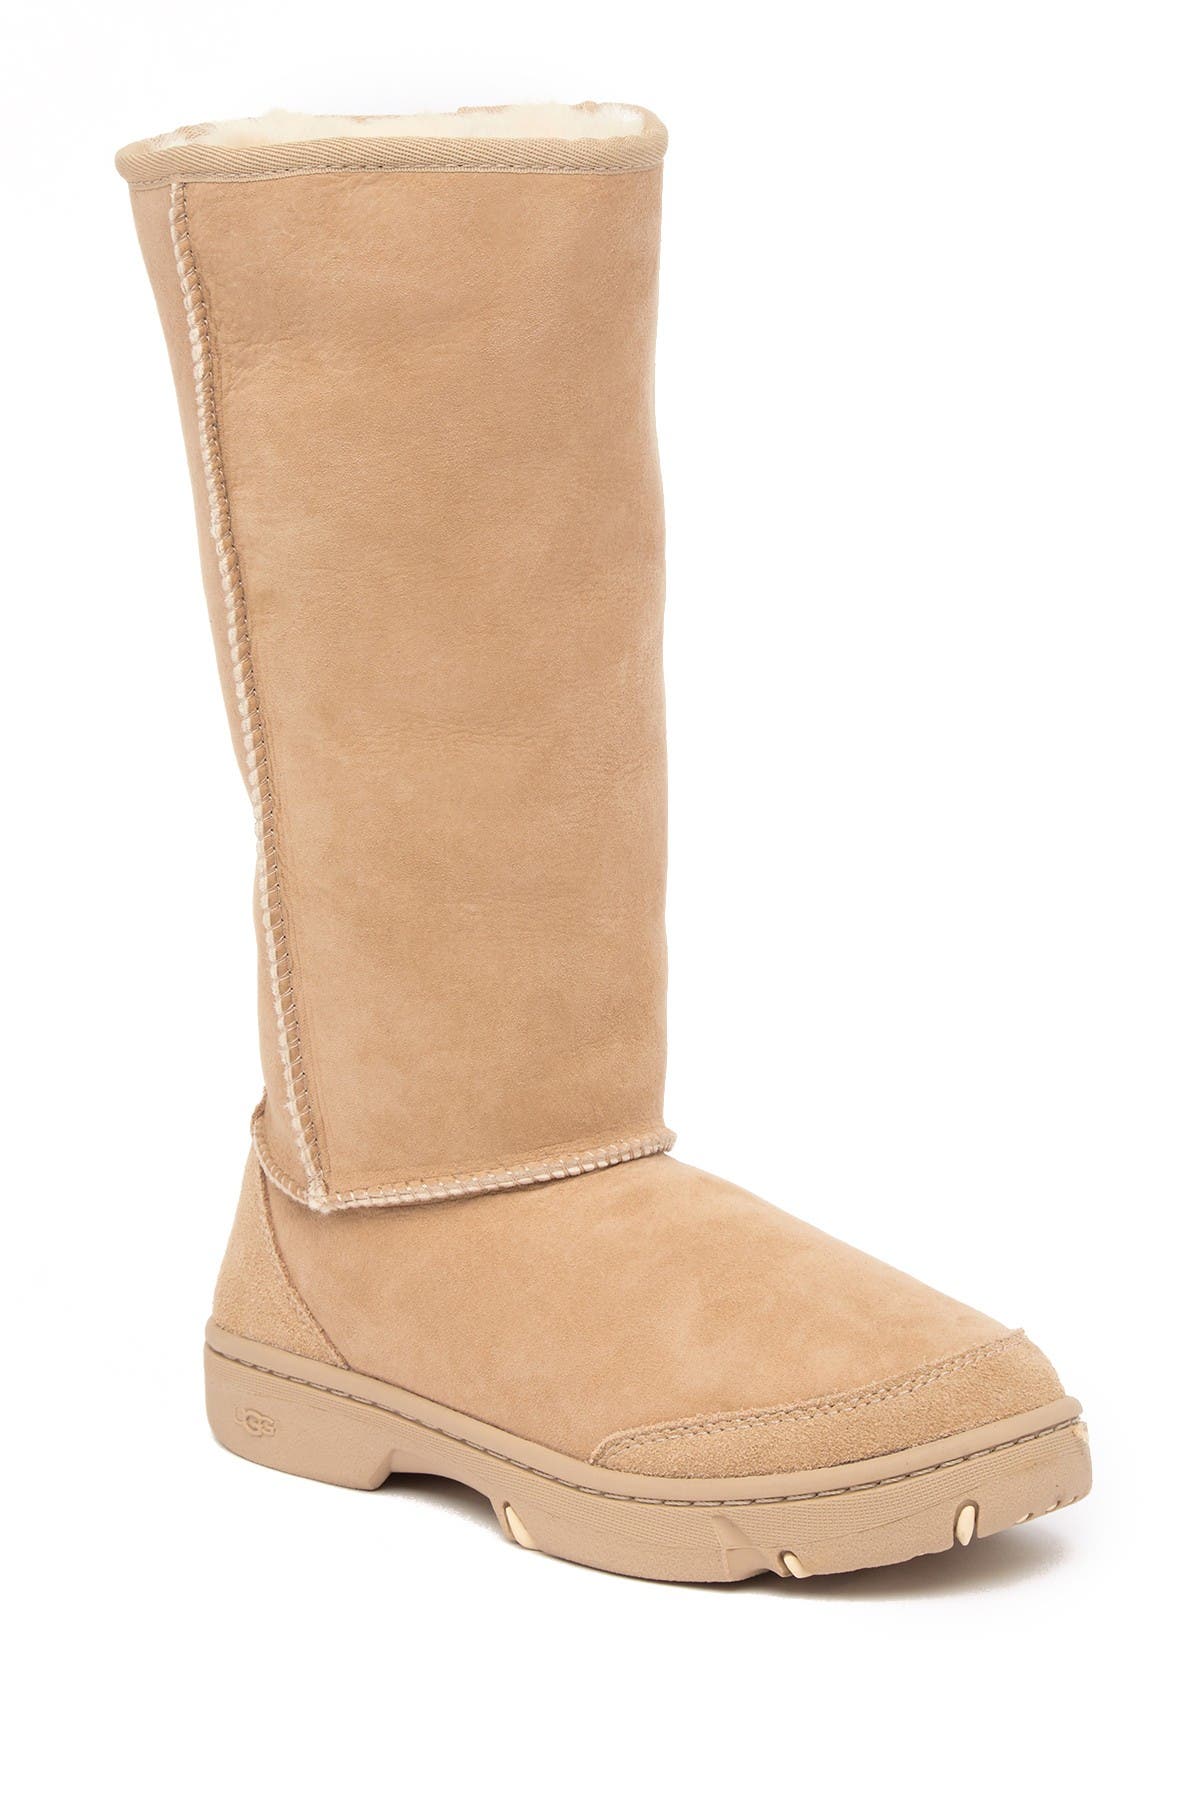 ultimate tall braid ugg boots